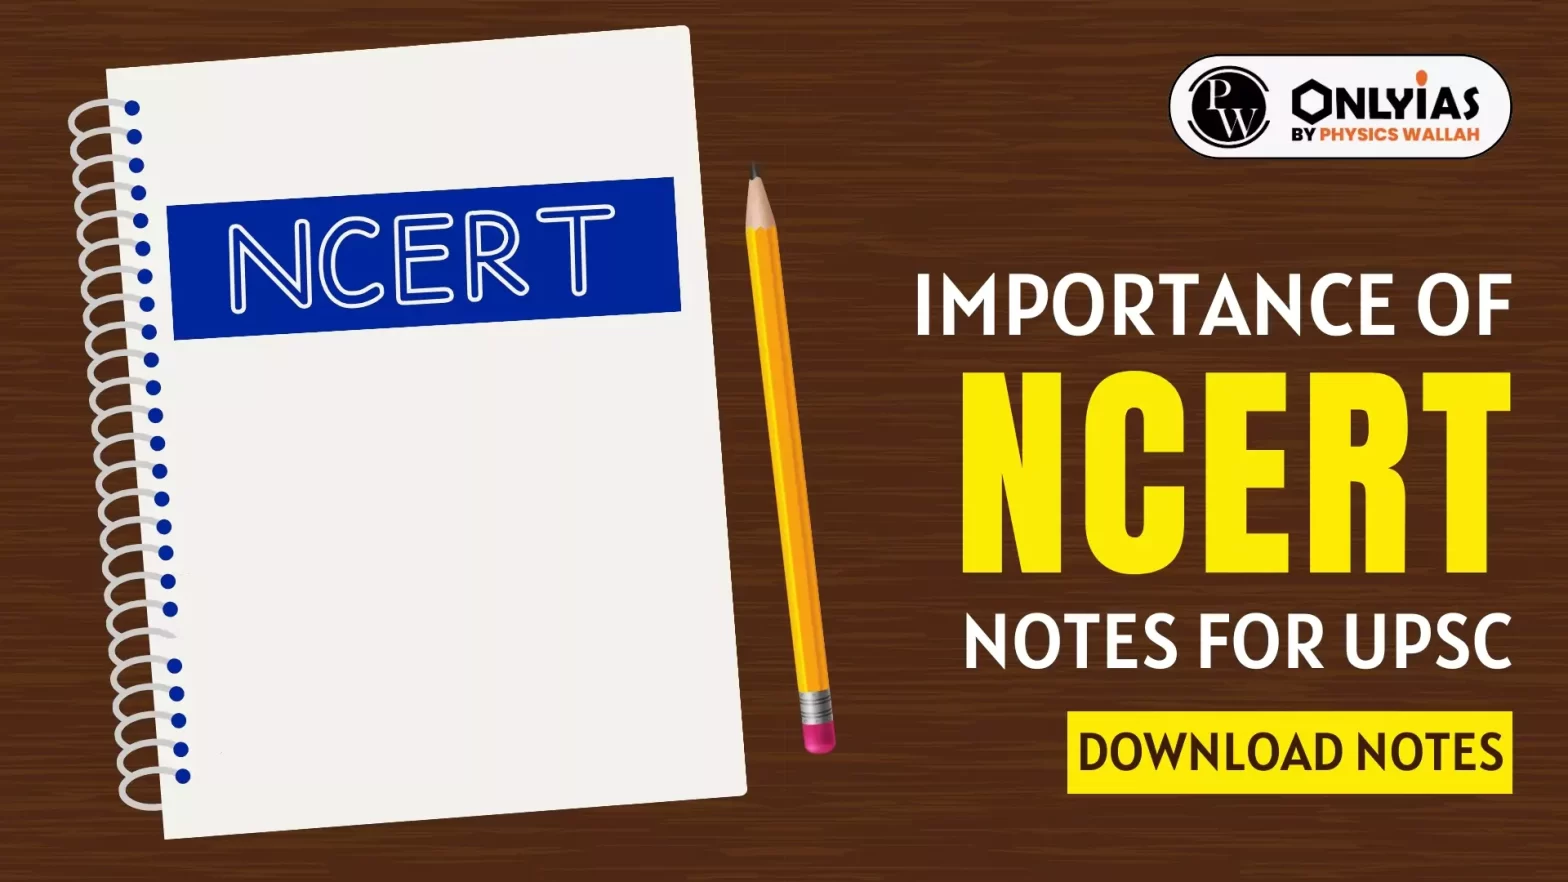 Importance of NCERT Notes For UPSC